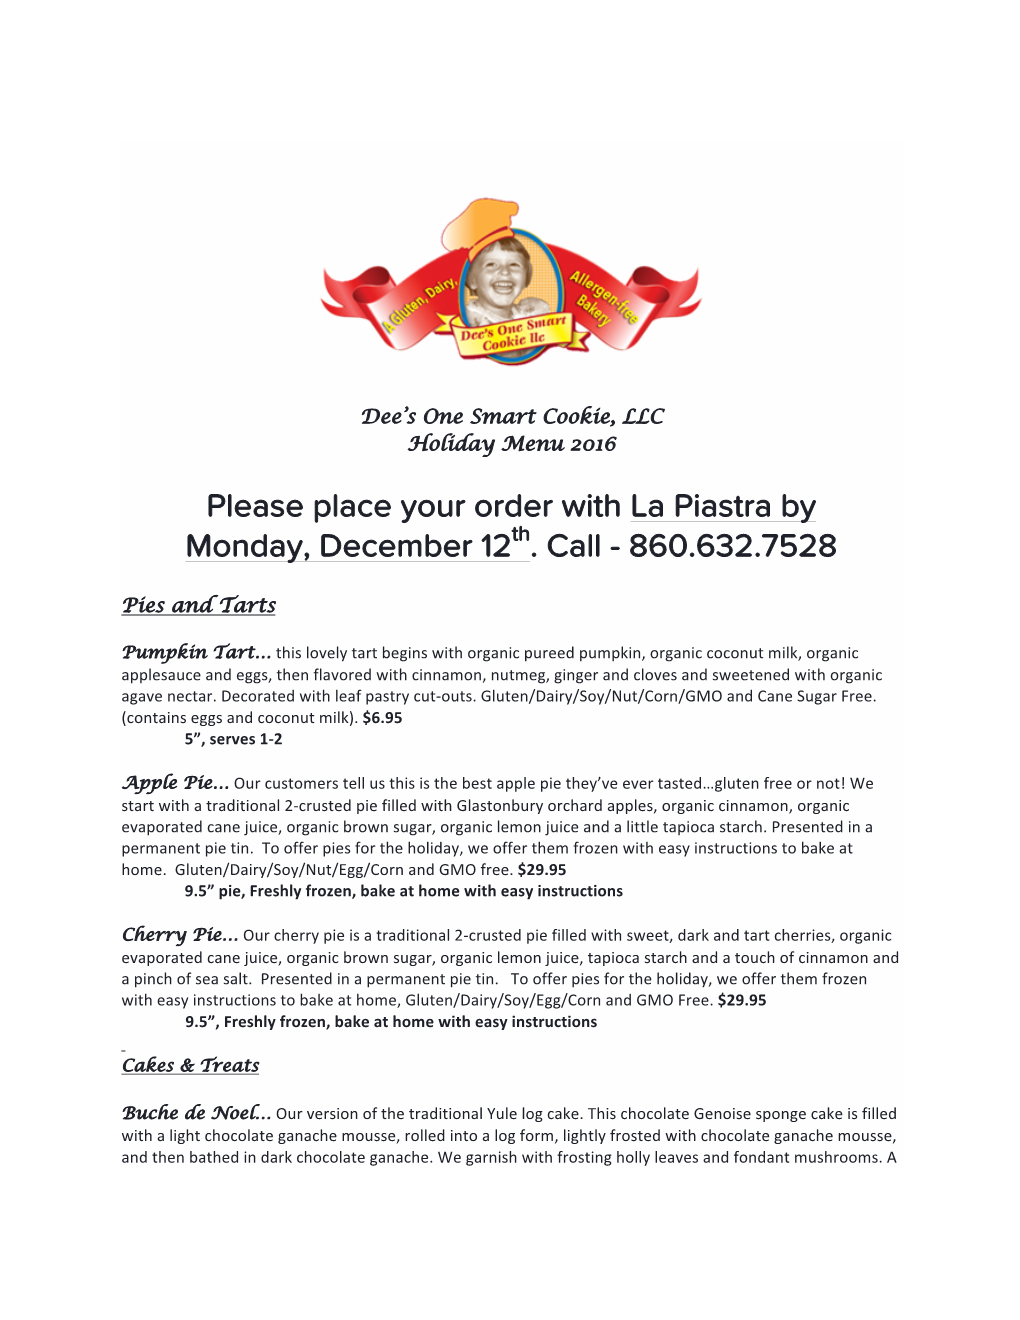 Please Place Your Order with La Piastra by Monday, December 12Th